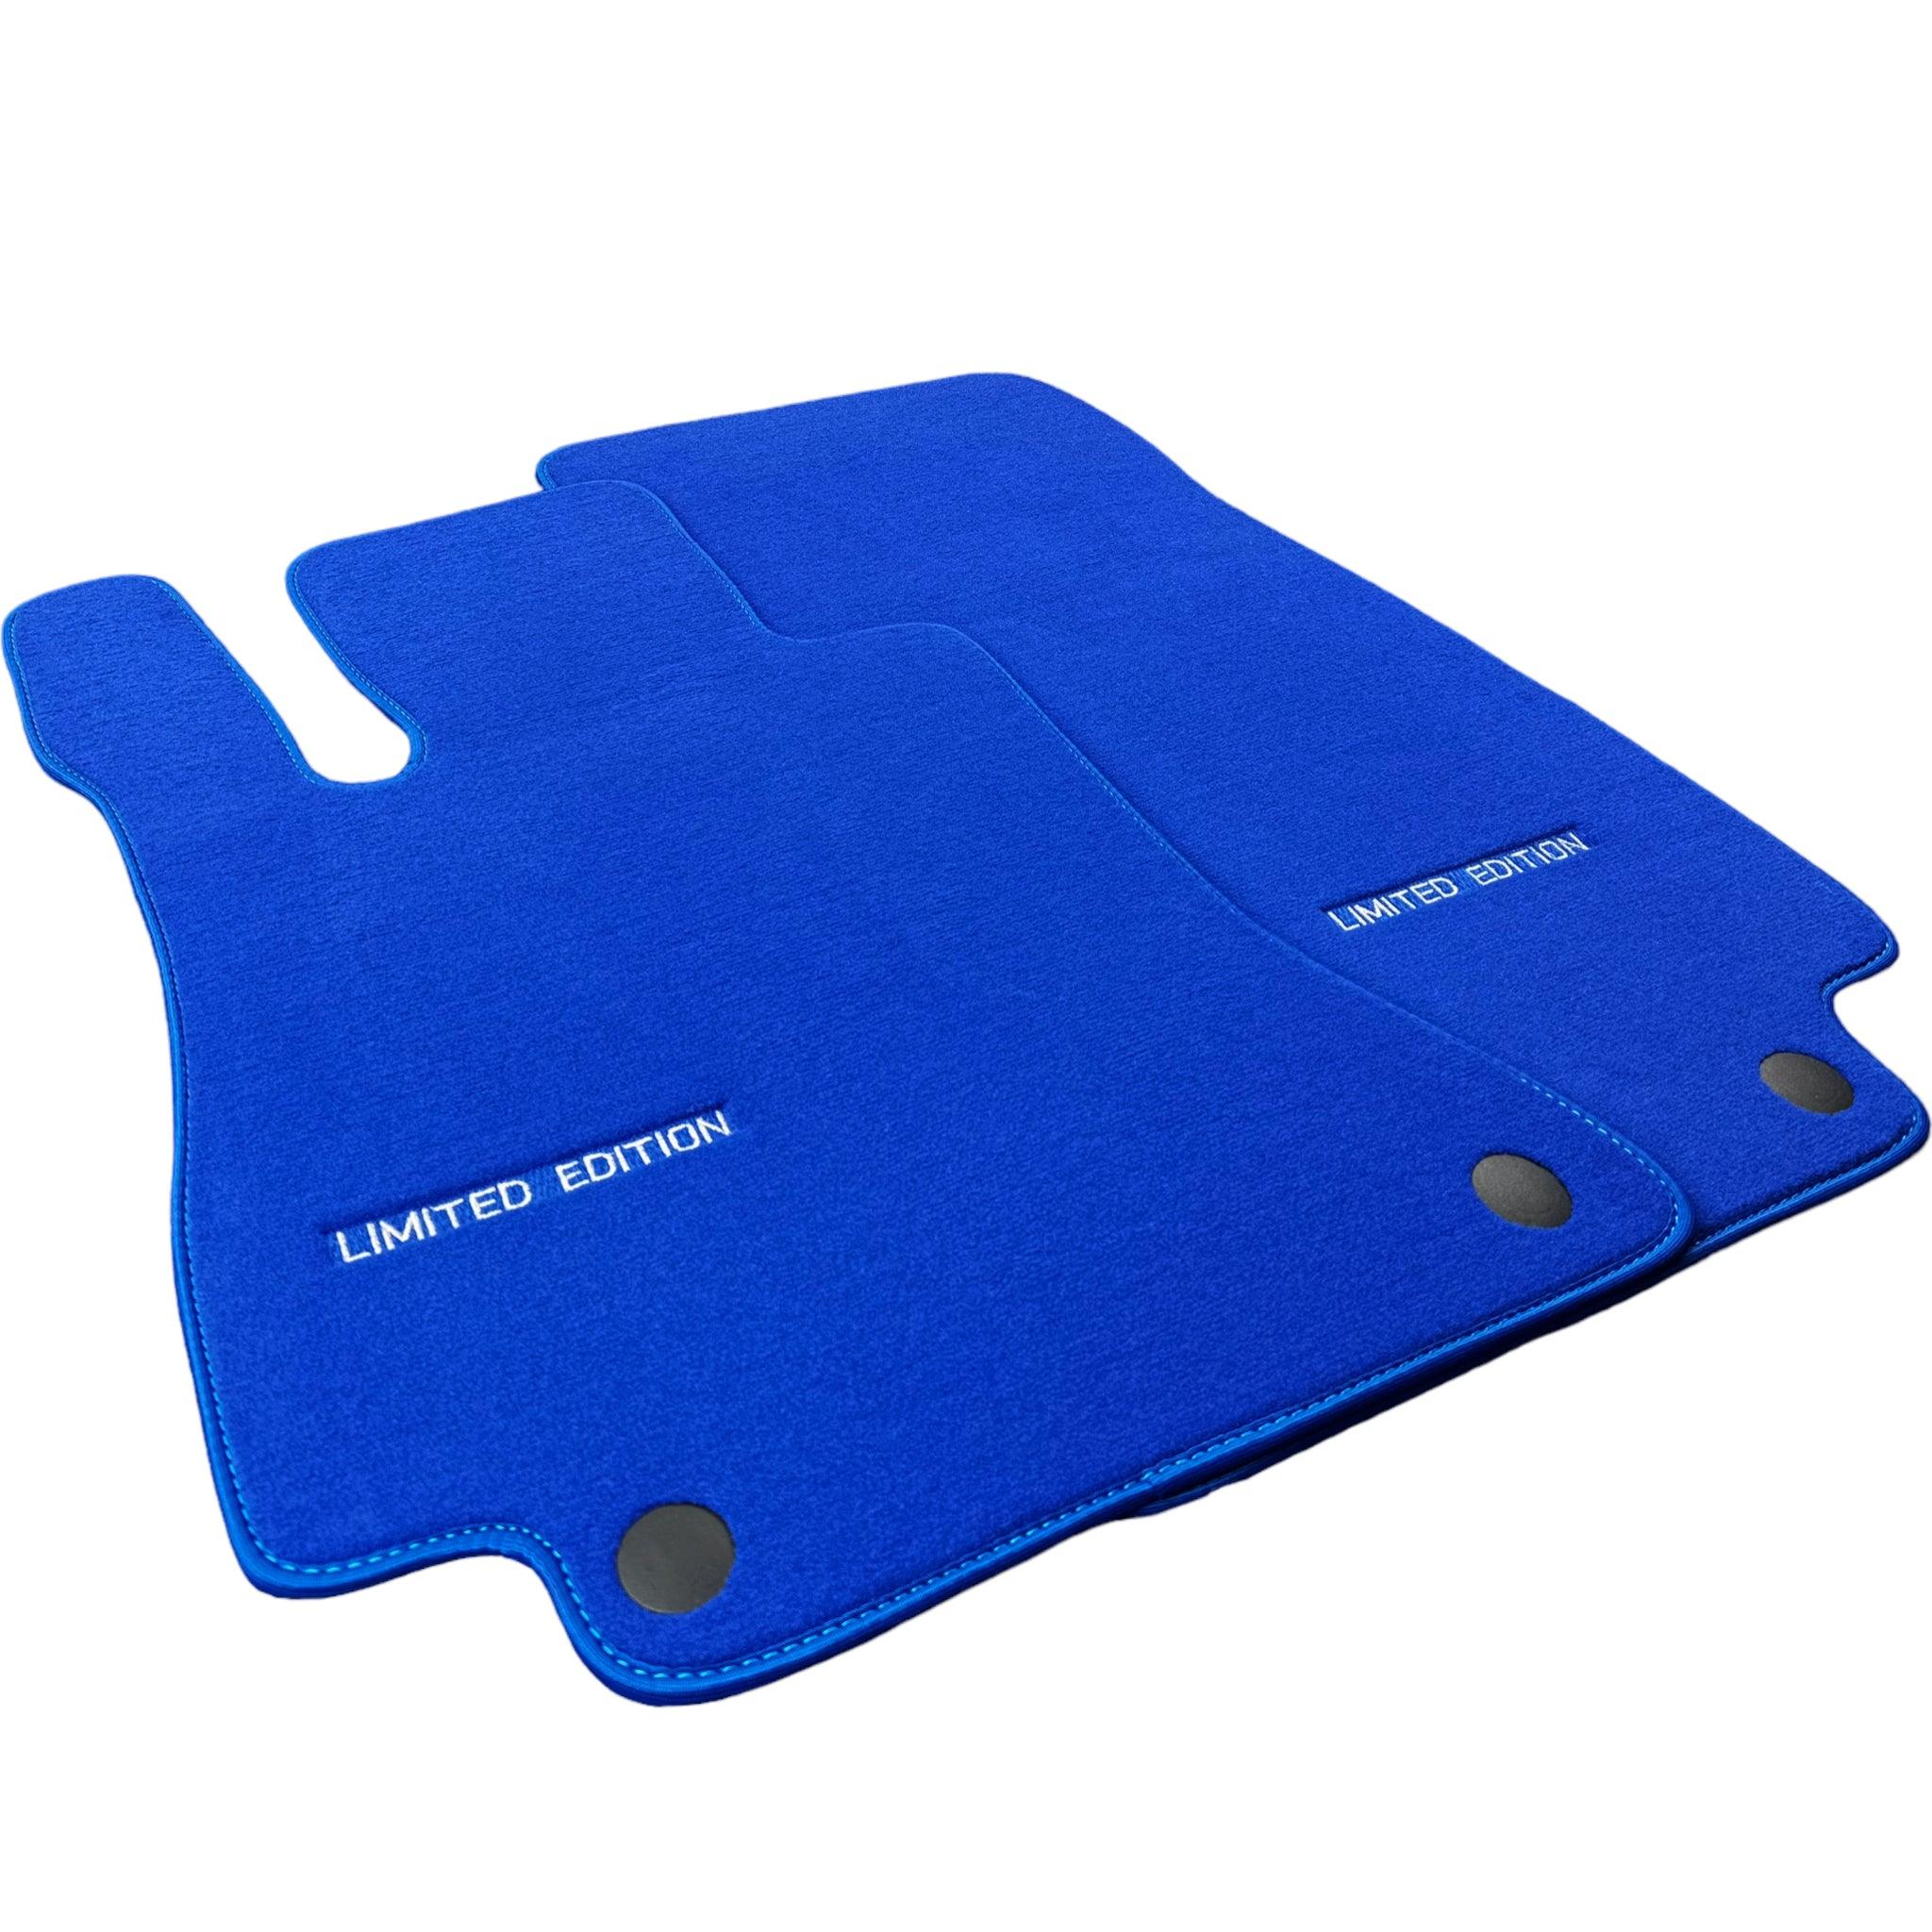 Blue Floor Mats For Mercedes Benz EQC-Class N293 (2019-2023) | Limited Edition